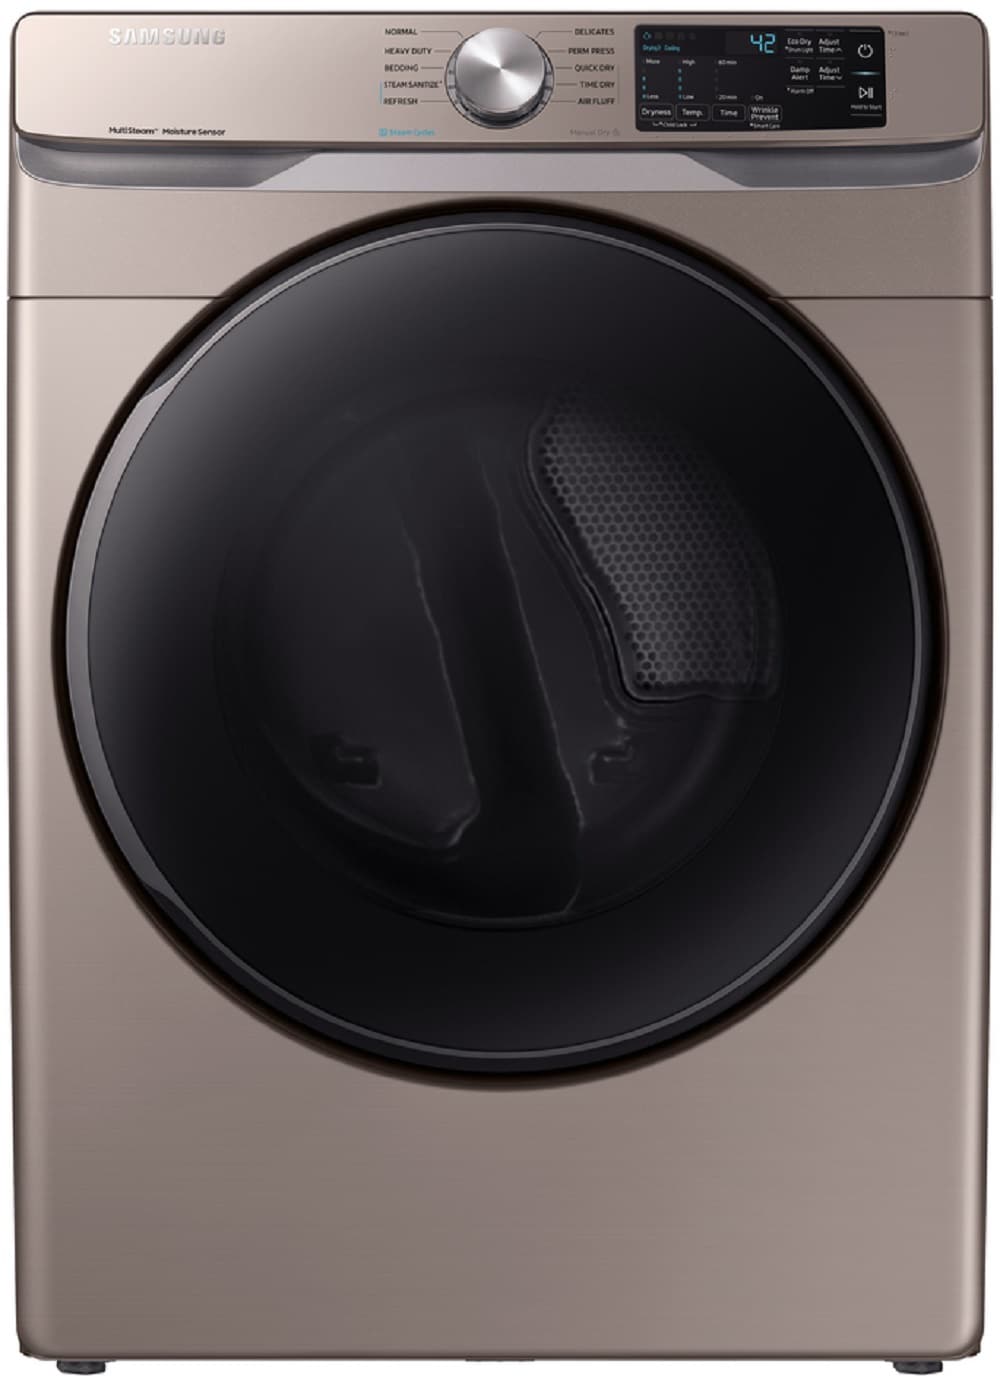 Samsung SAWADRGC61002 Side-by-Side on Pedestals Washer & Dryer Set with  Front Load Washer and Gas Dryer in Champagne